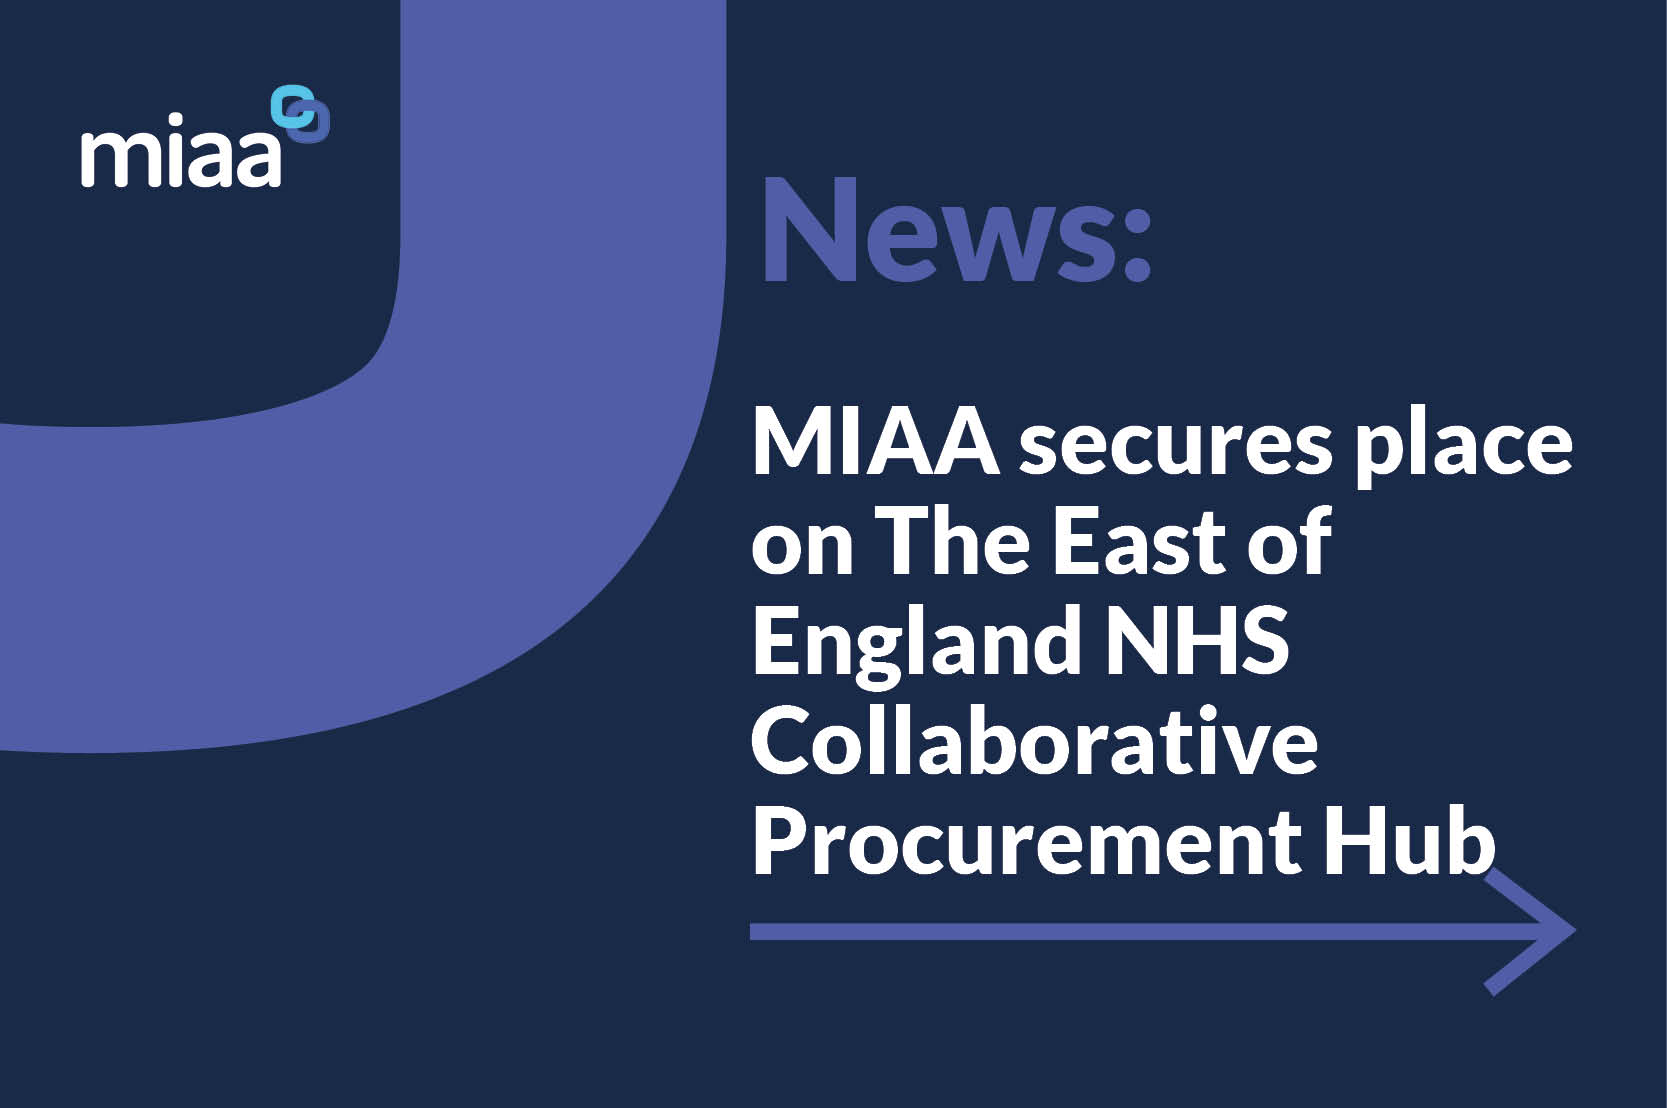 MIAA secures place on The East of England NHS Collaborative Procurement Hub